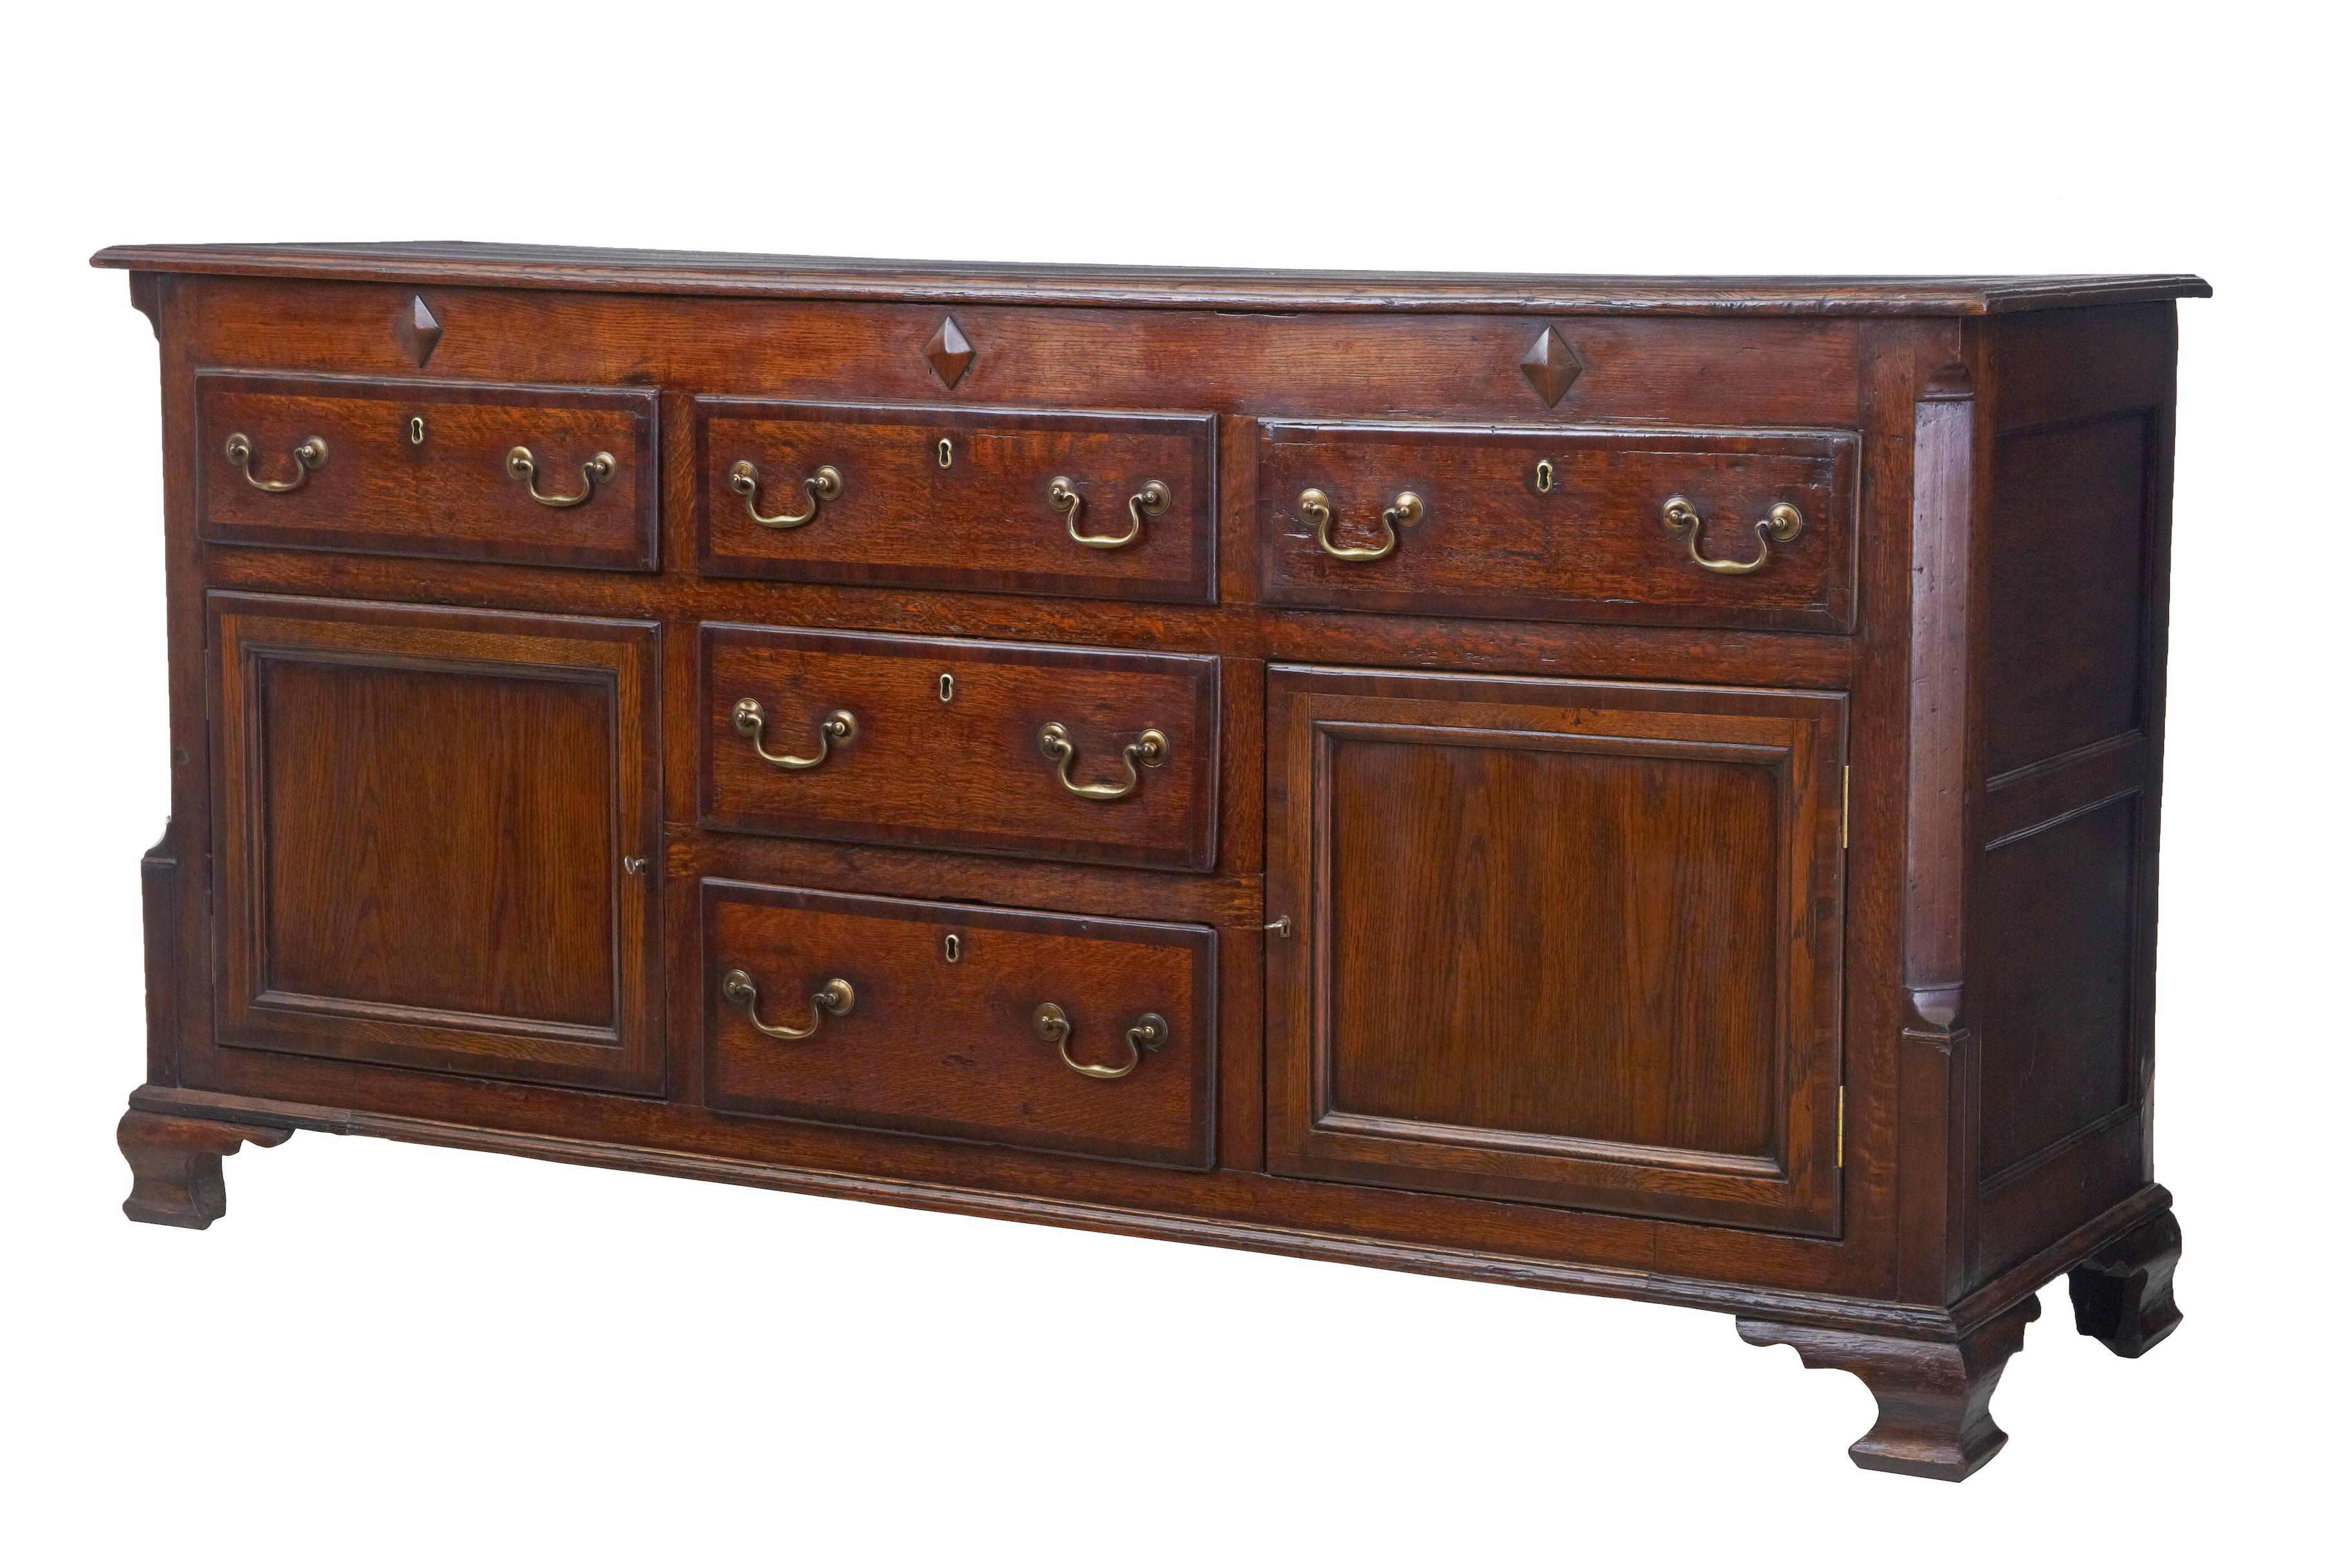 Good quality oak dresser base, circa 1780.
Three drawers over two drawers and two cupboards.
Crossbanded drawer fronts.
Canted corners, standing on original bracket feet.

Measures: Height 35 1/2",
length 72 1/4",
depth 21".
 